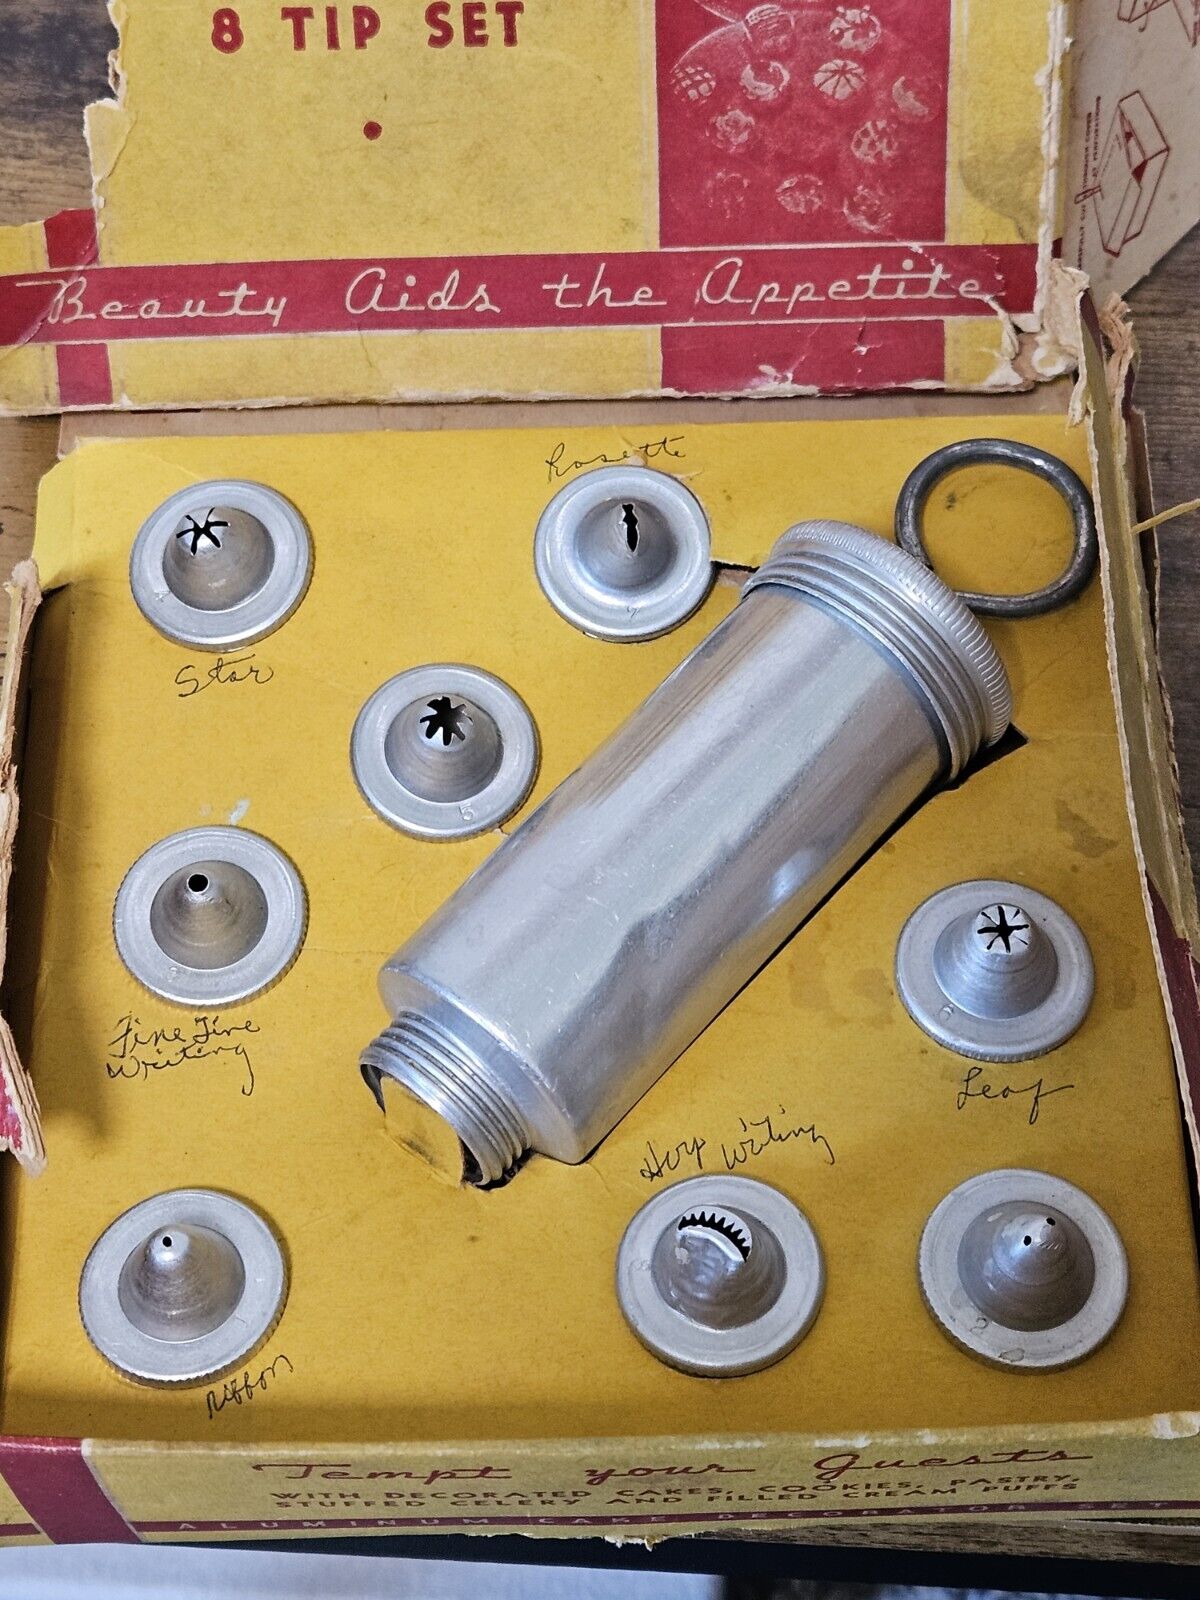 VINTAGE ROYAL INDUSTRIES Aluminum Cake Decorator with 8 Tips 